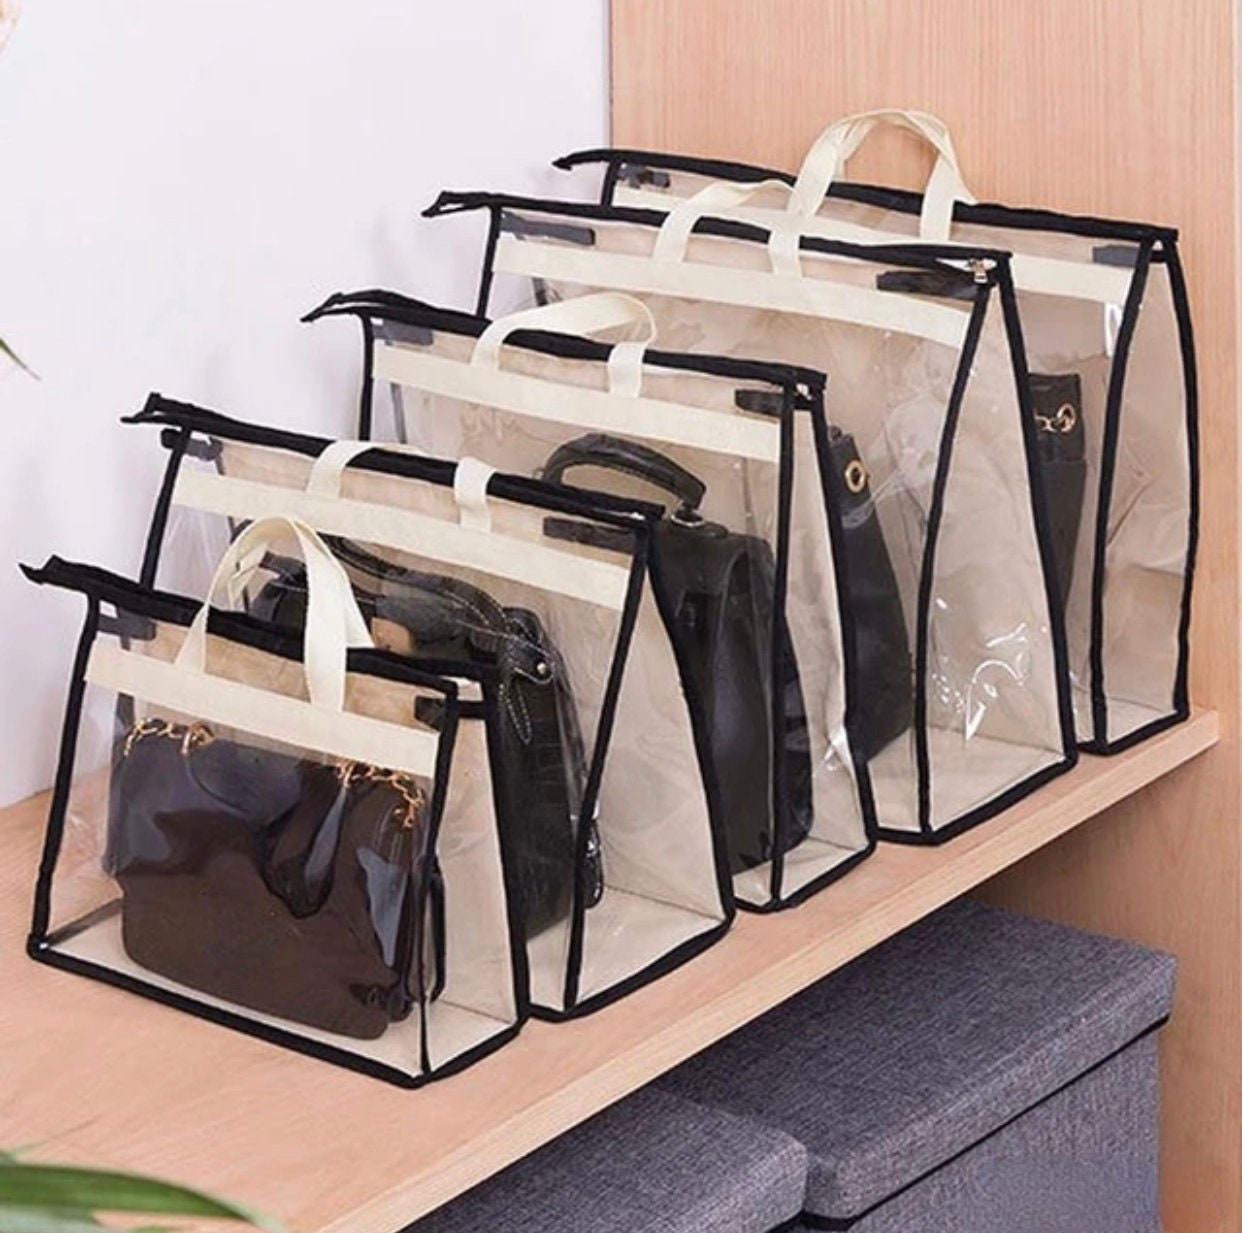 Premium Photo  Womens bags shoes and accessories on the shelves in the  store modern stylish fashion vertical